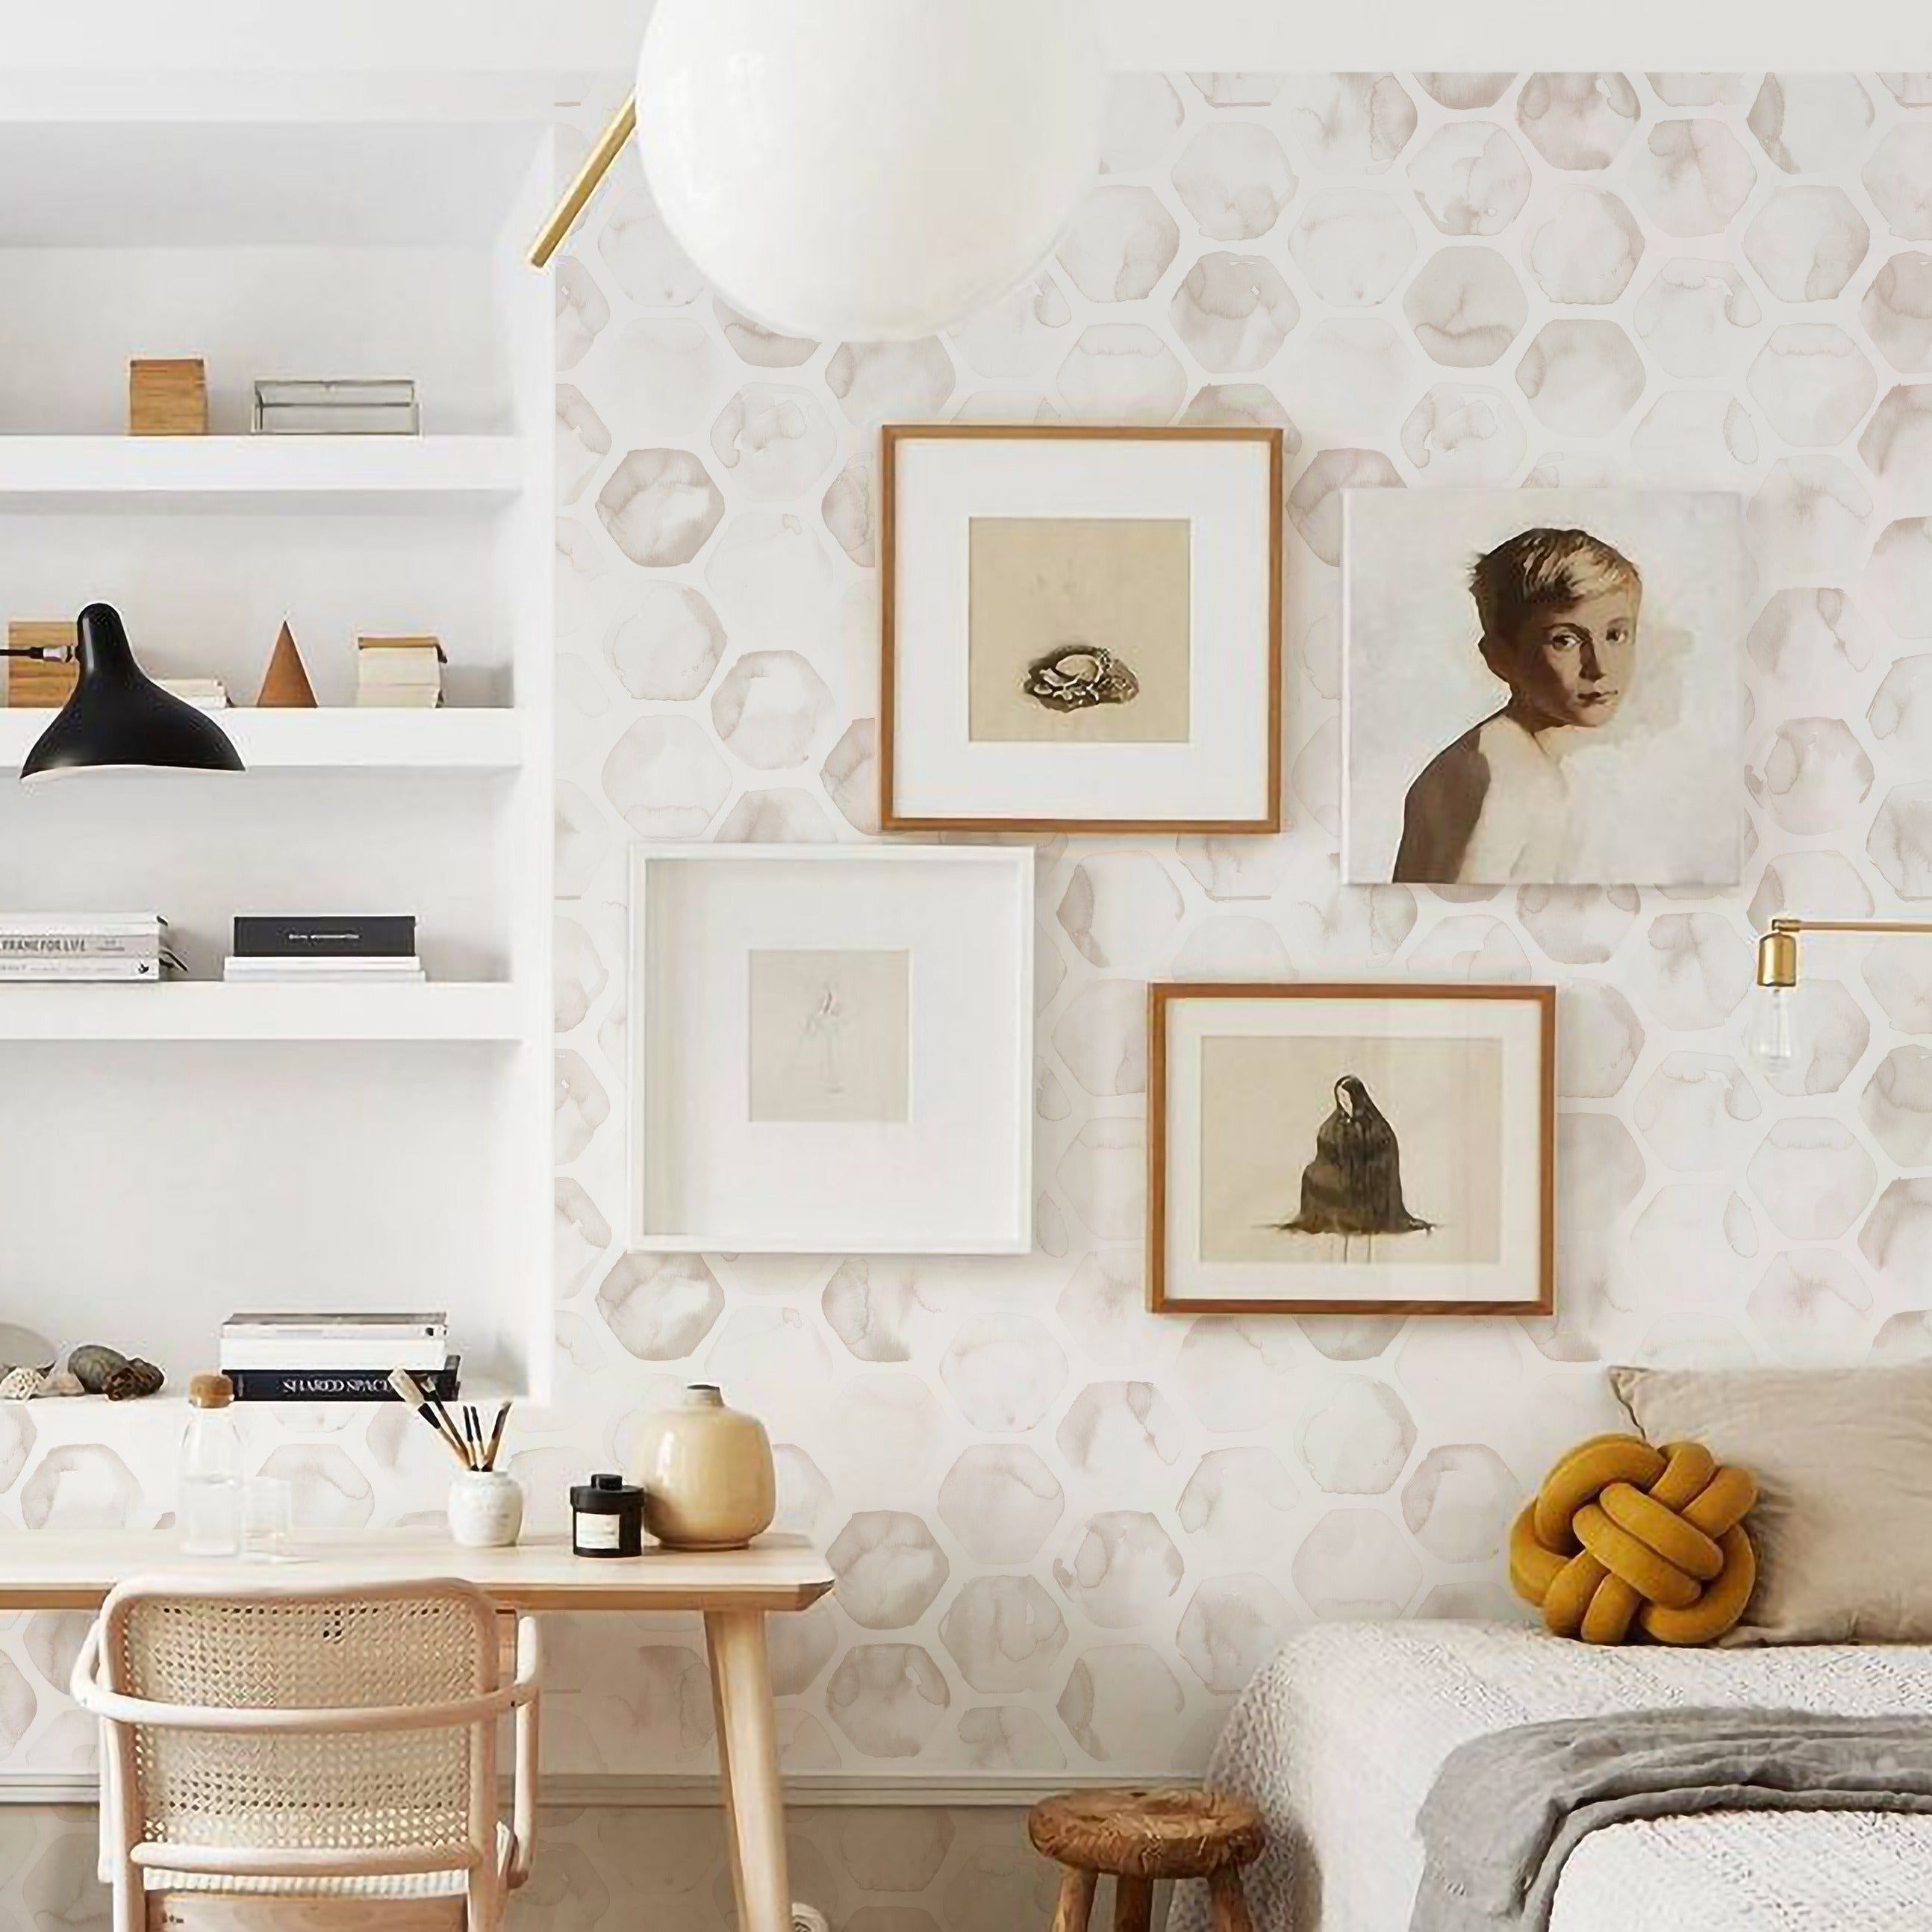 An interior design setting showcasing a wall adorned with the Watercolour Honeycomb Wallpaper, complemented by a modern minimalist décor including a white bookshelf, a wooden desk with a chair, artwork frames, and cozy textiles."